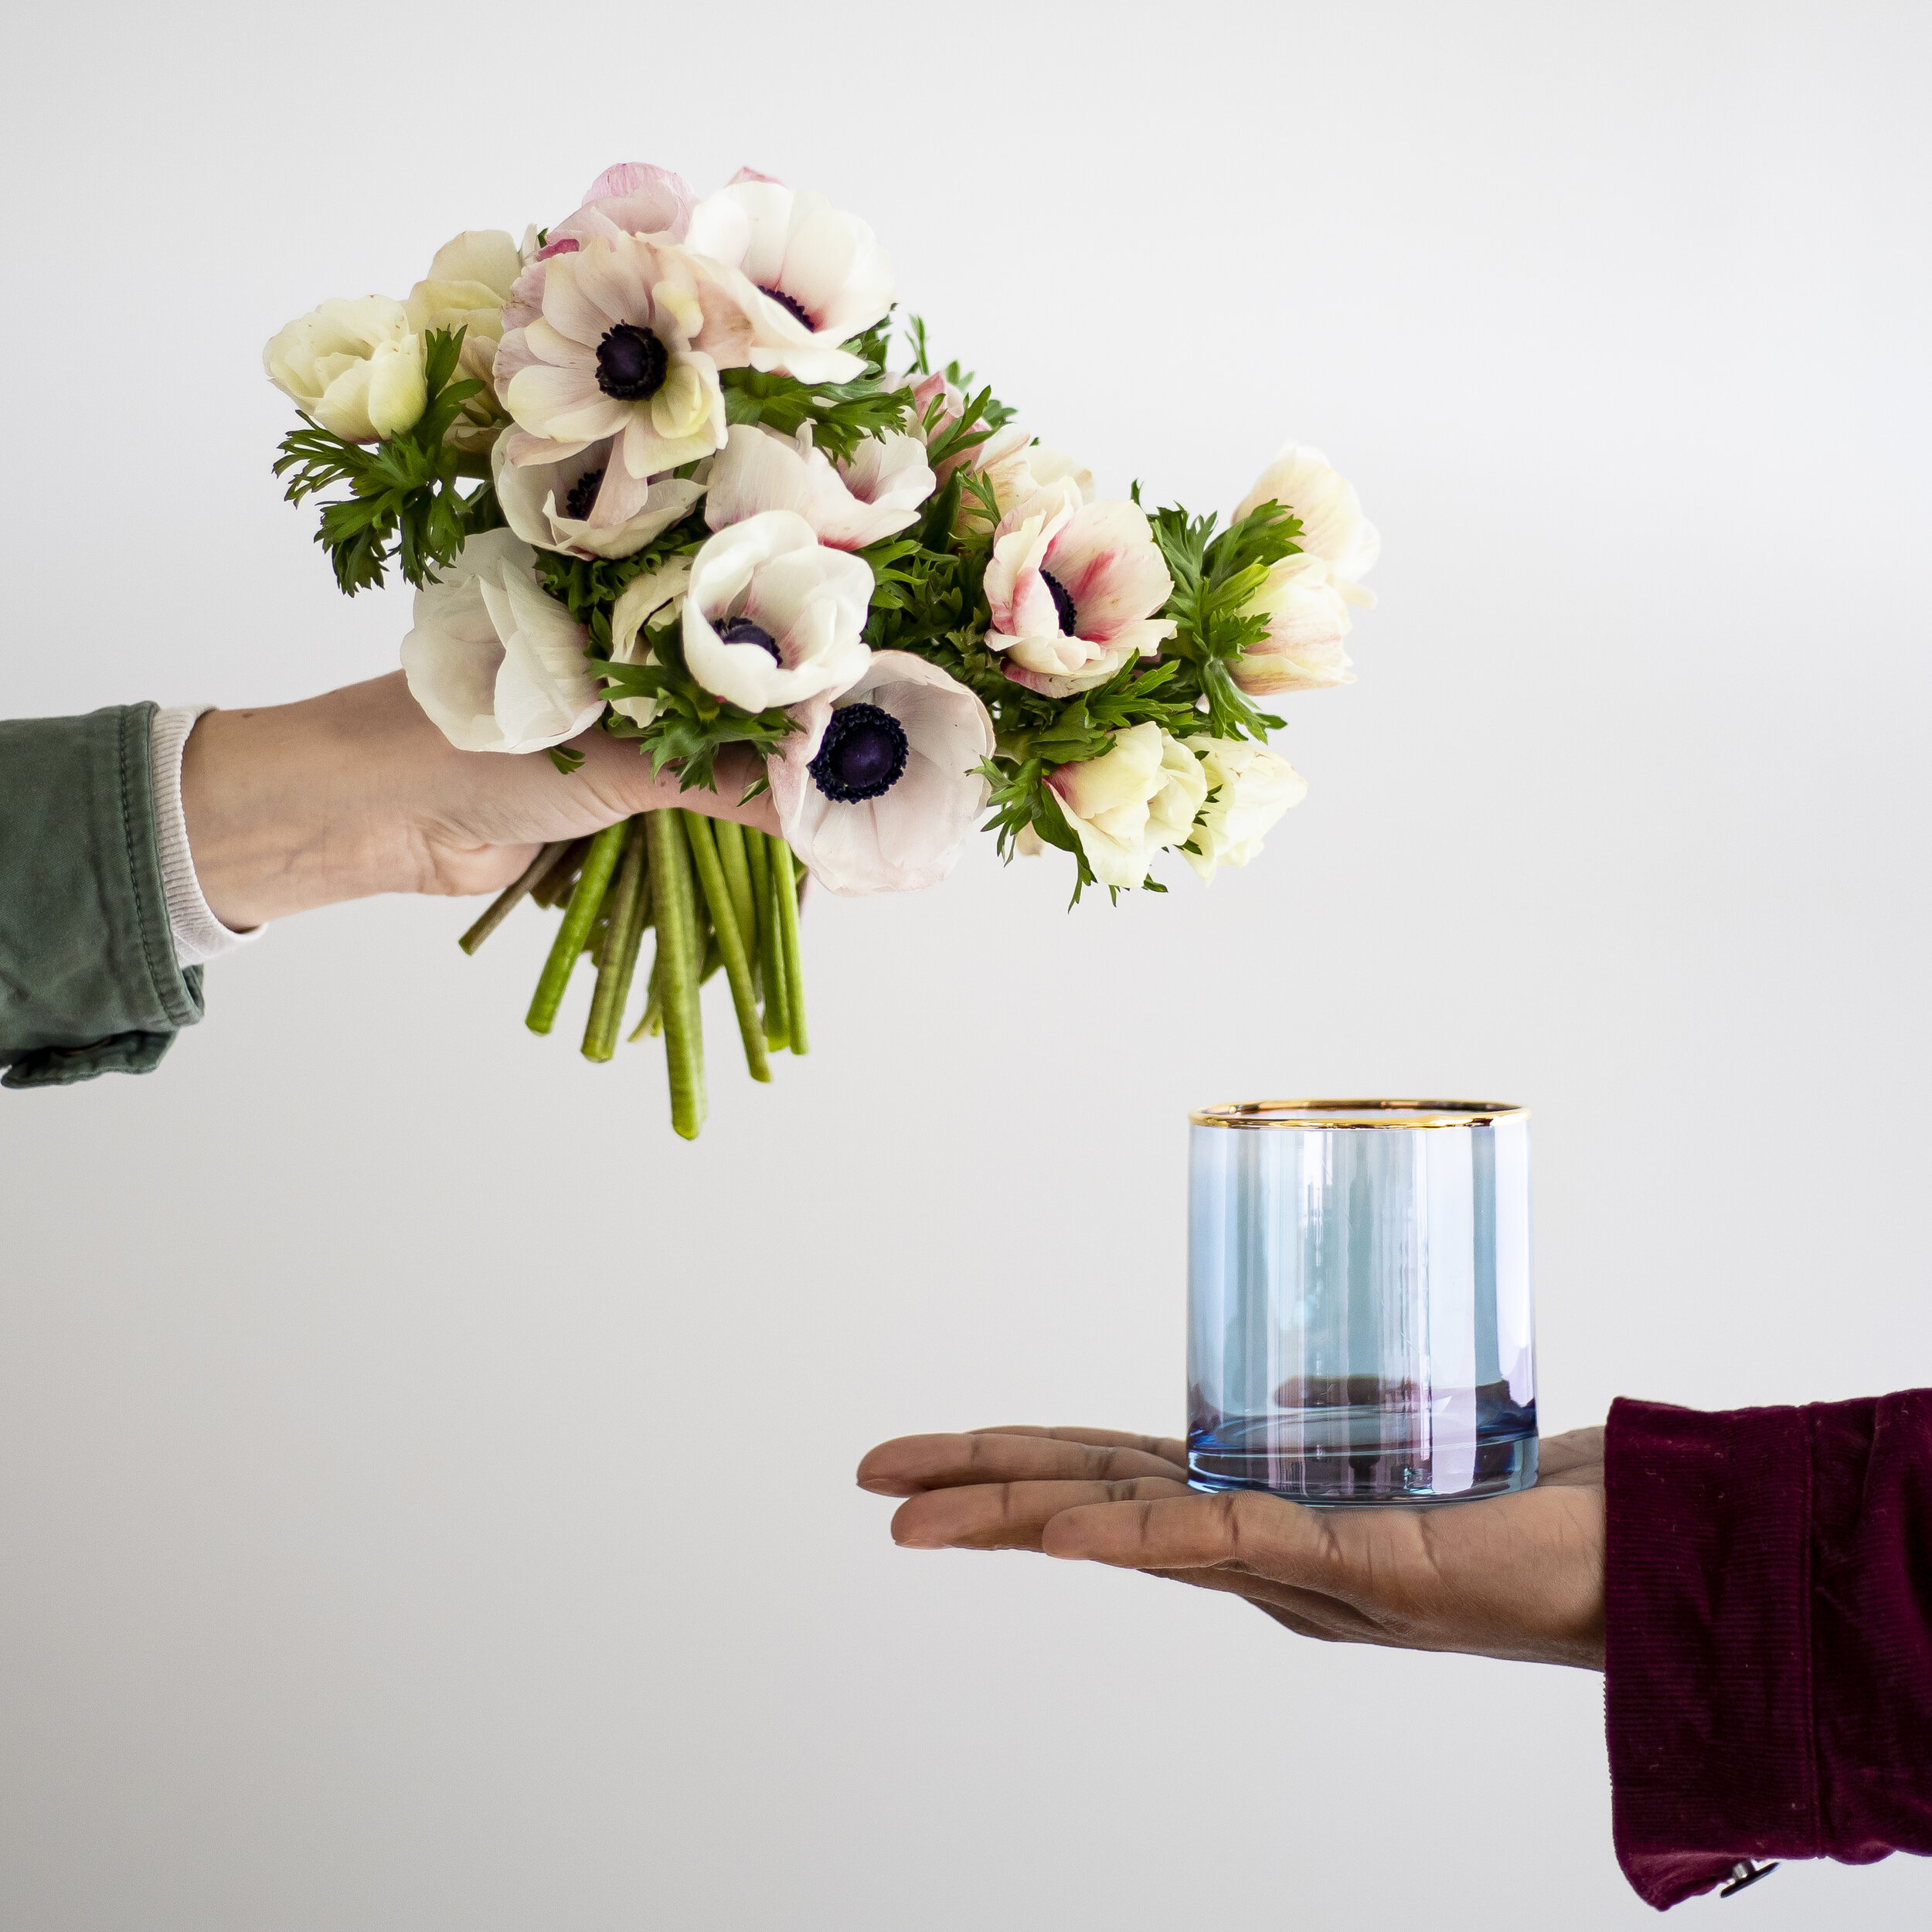 Light link and ivory anemone stems held in one hand, with another hand holding a transparent blue glass vase in the other